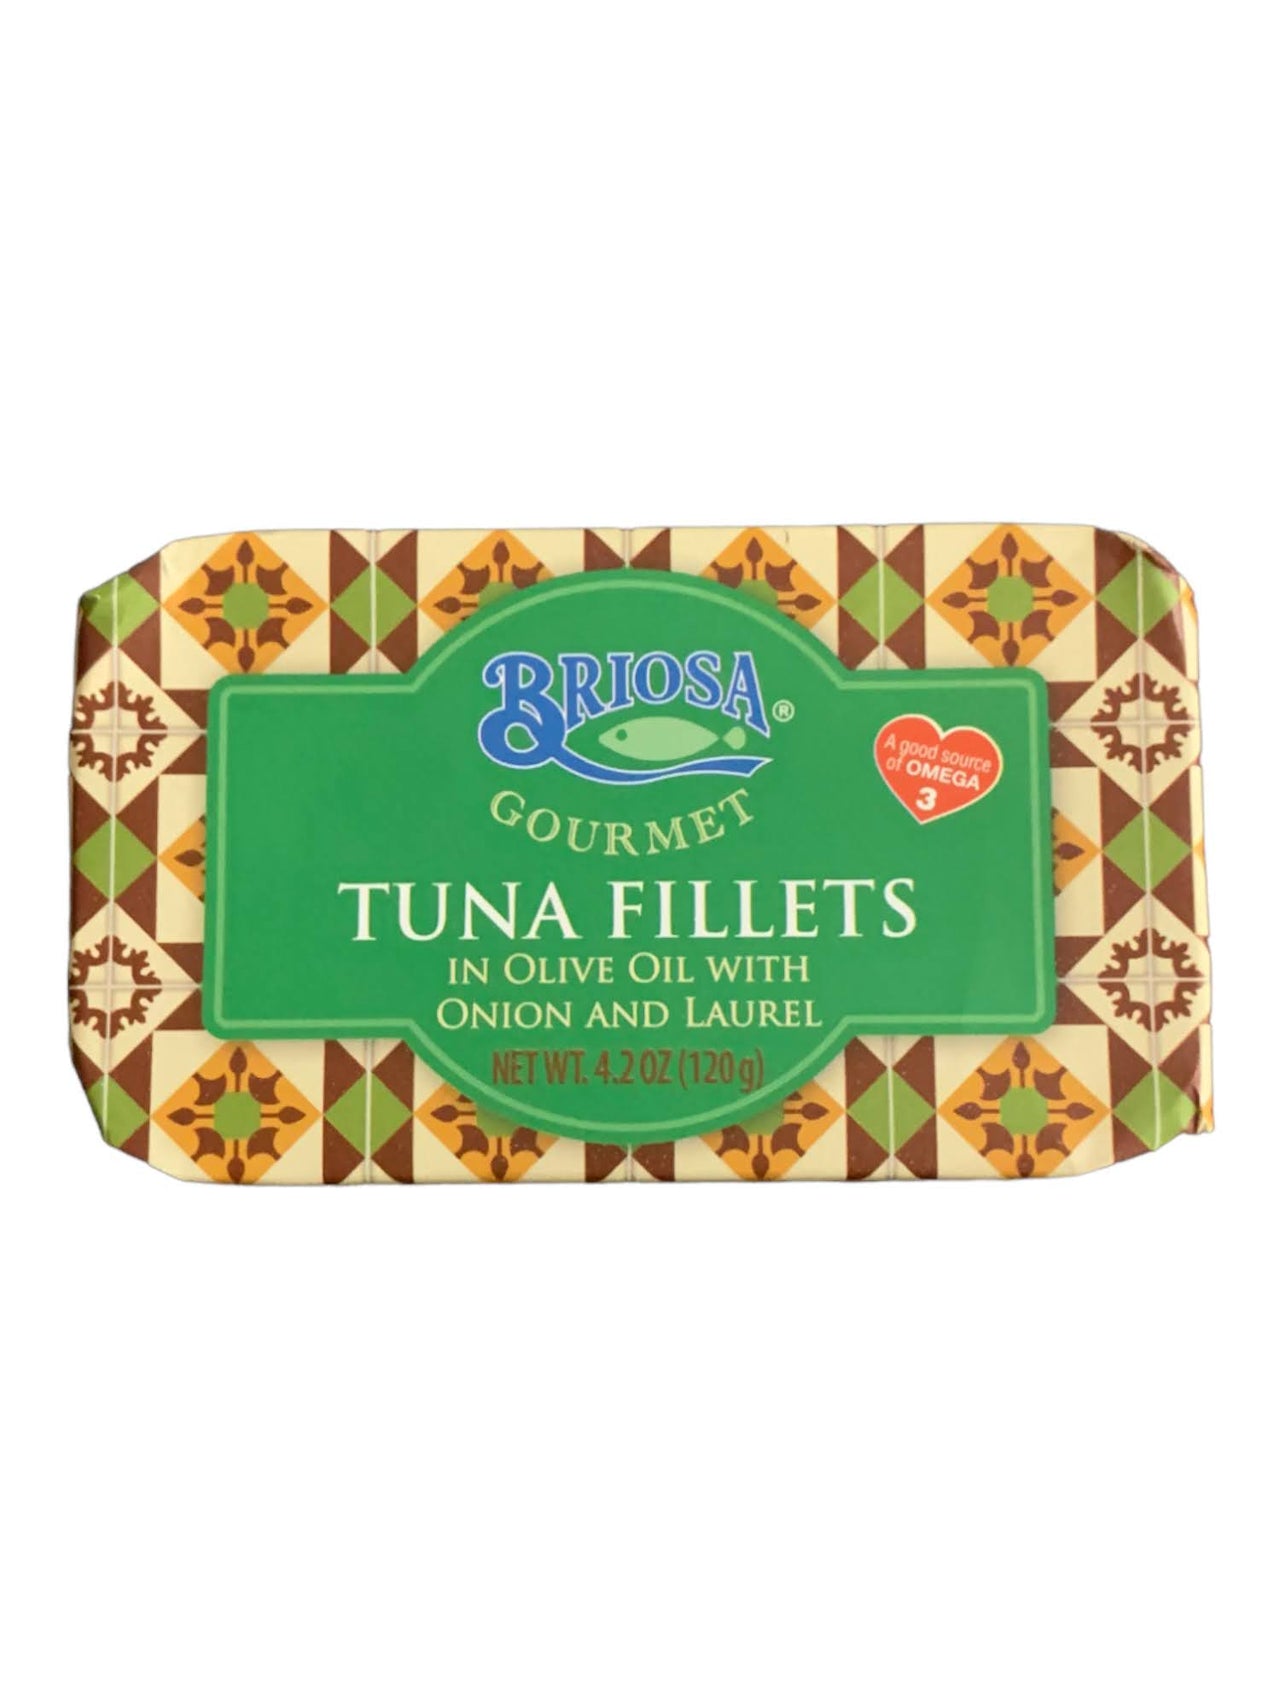 Briosa Gourmet Tuna Fillets in Olive Oil with Onion and Laurel - 3 Pack